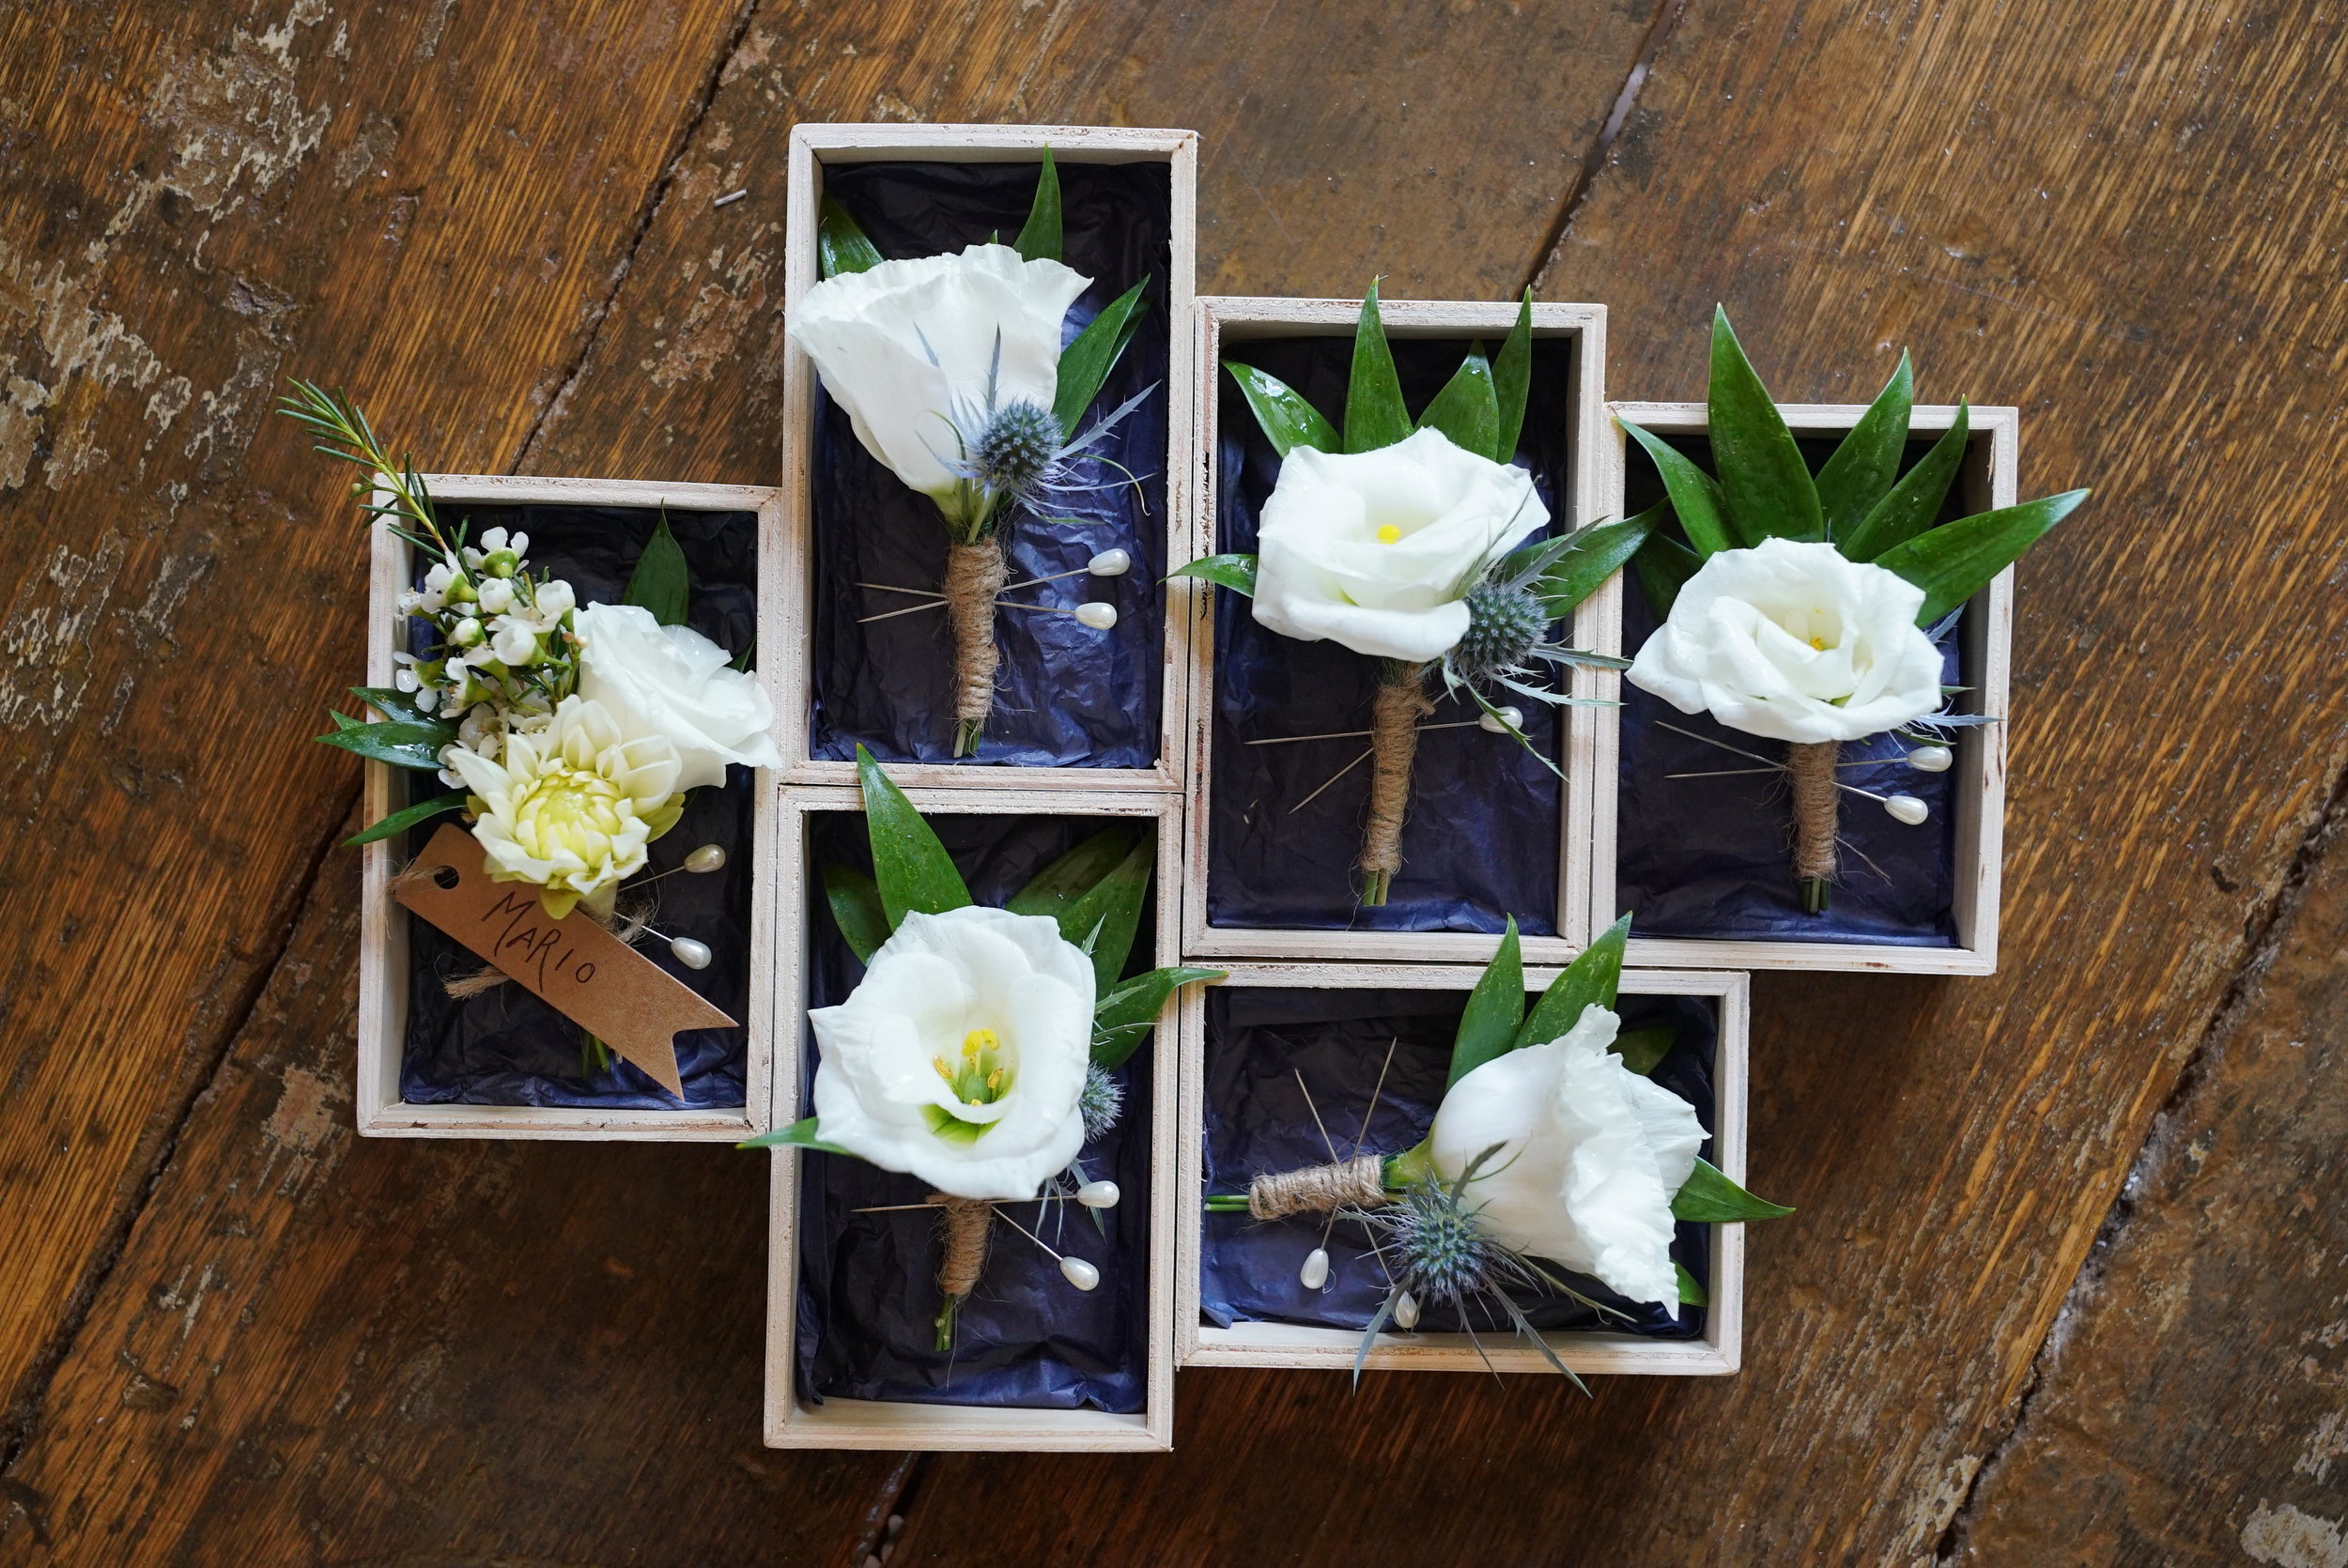  This trinket box made for the perfect delivery tray! 